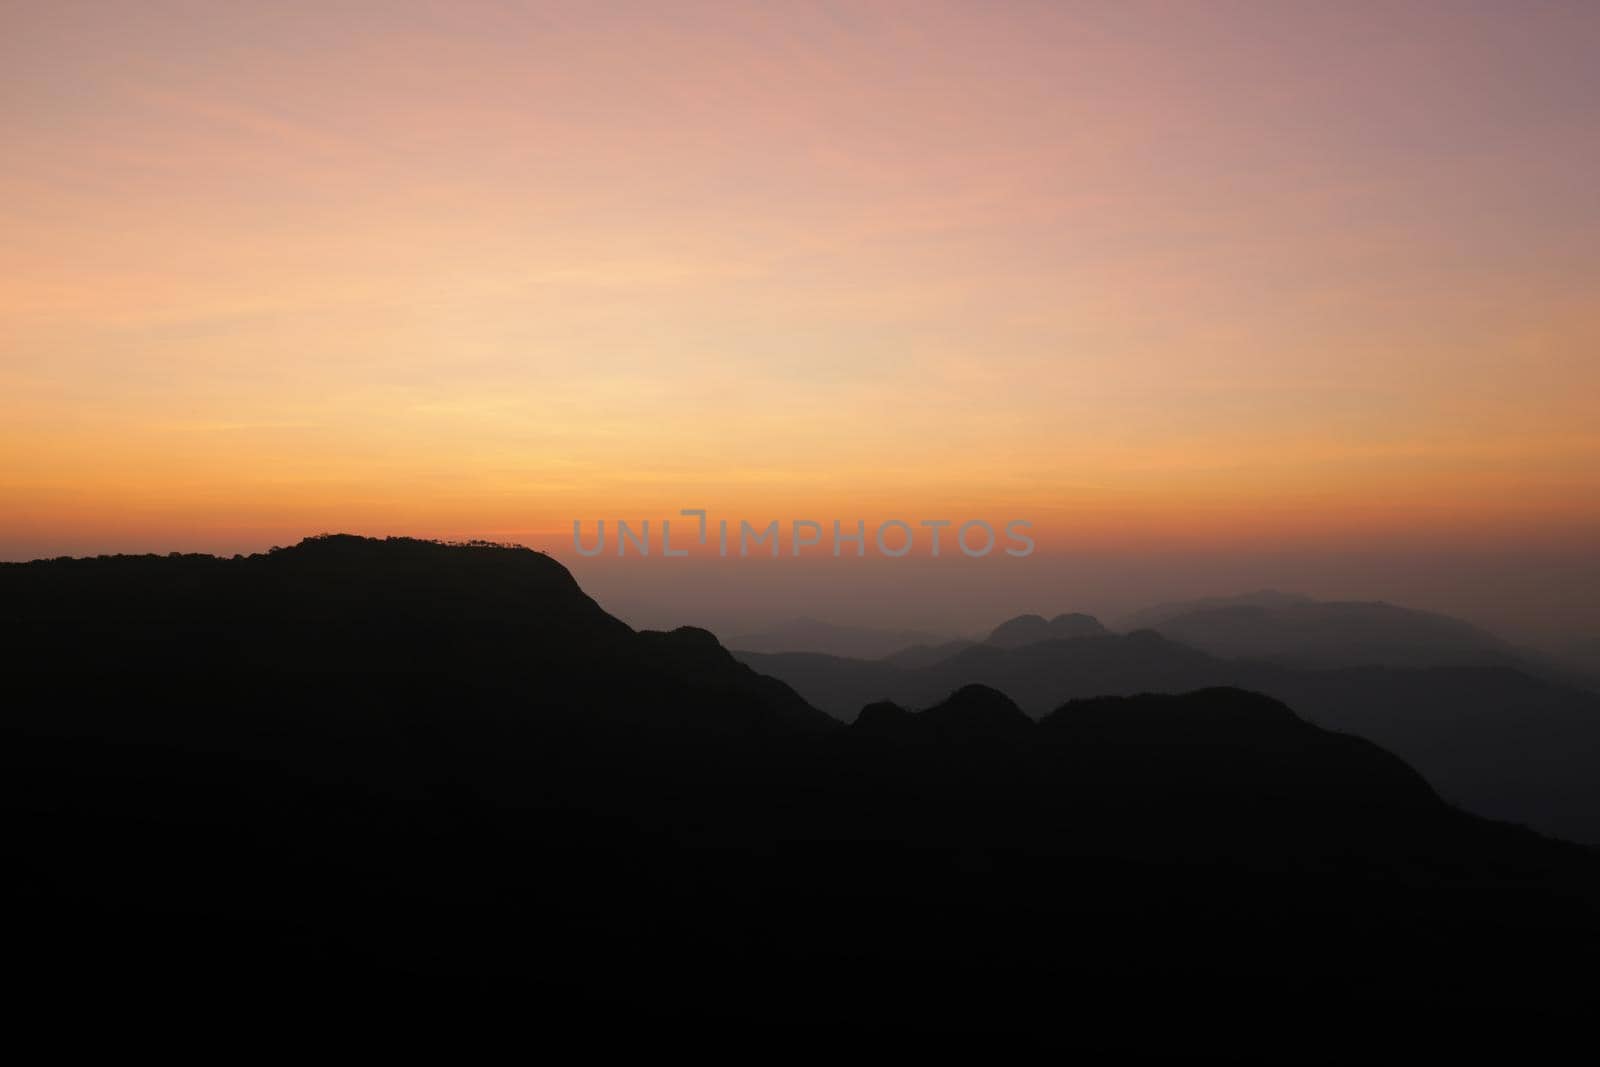 Mountain from the highest point of the sunset view. by samarttiw